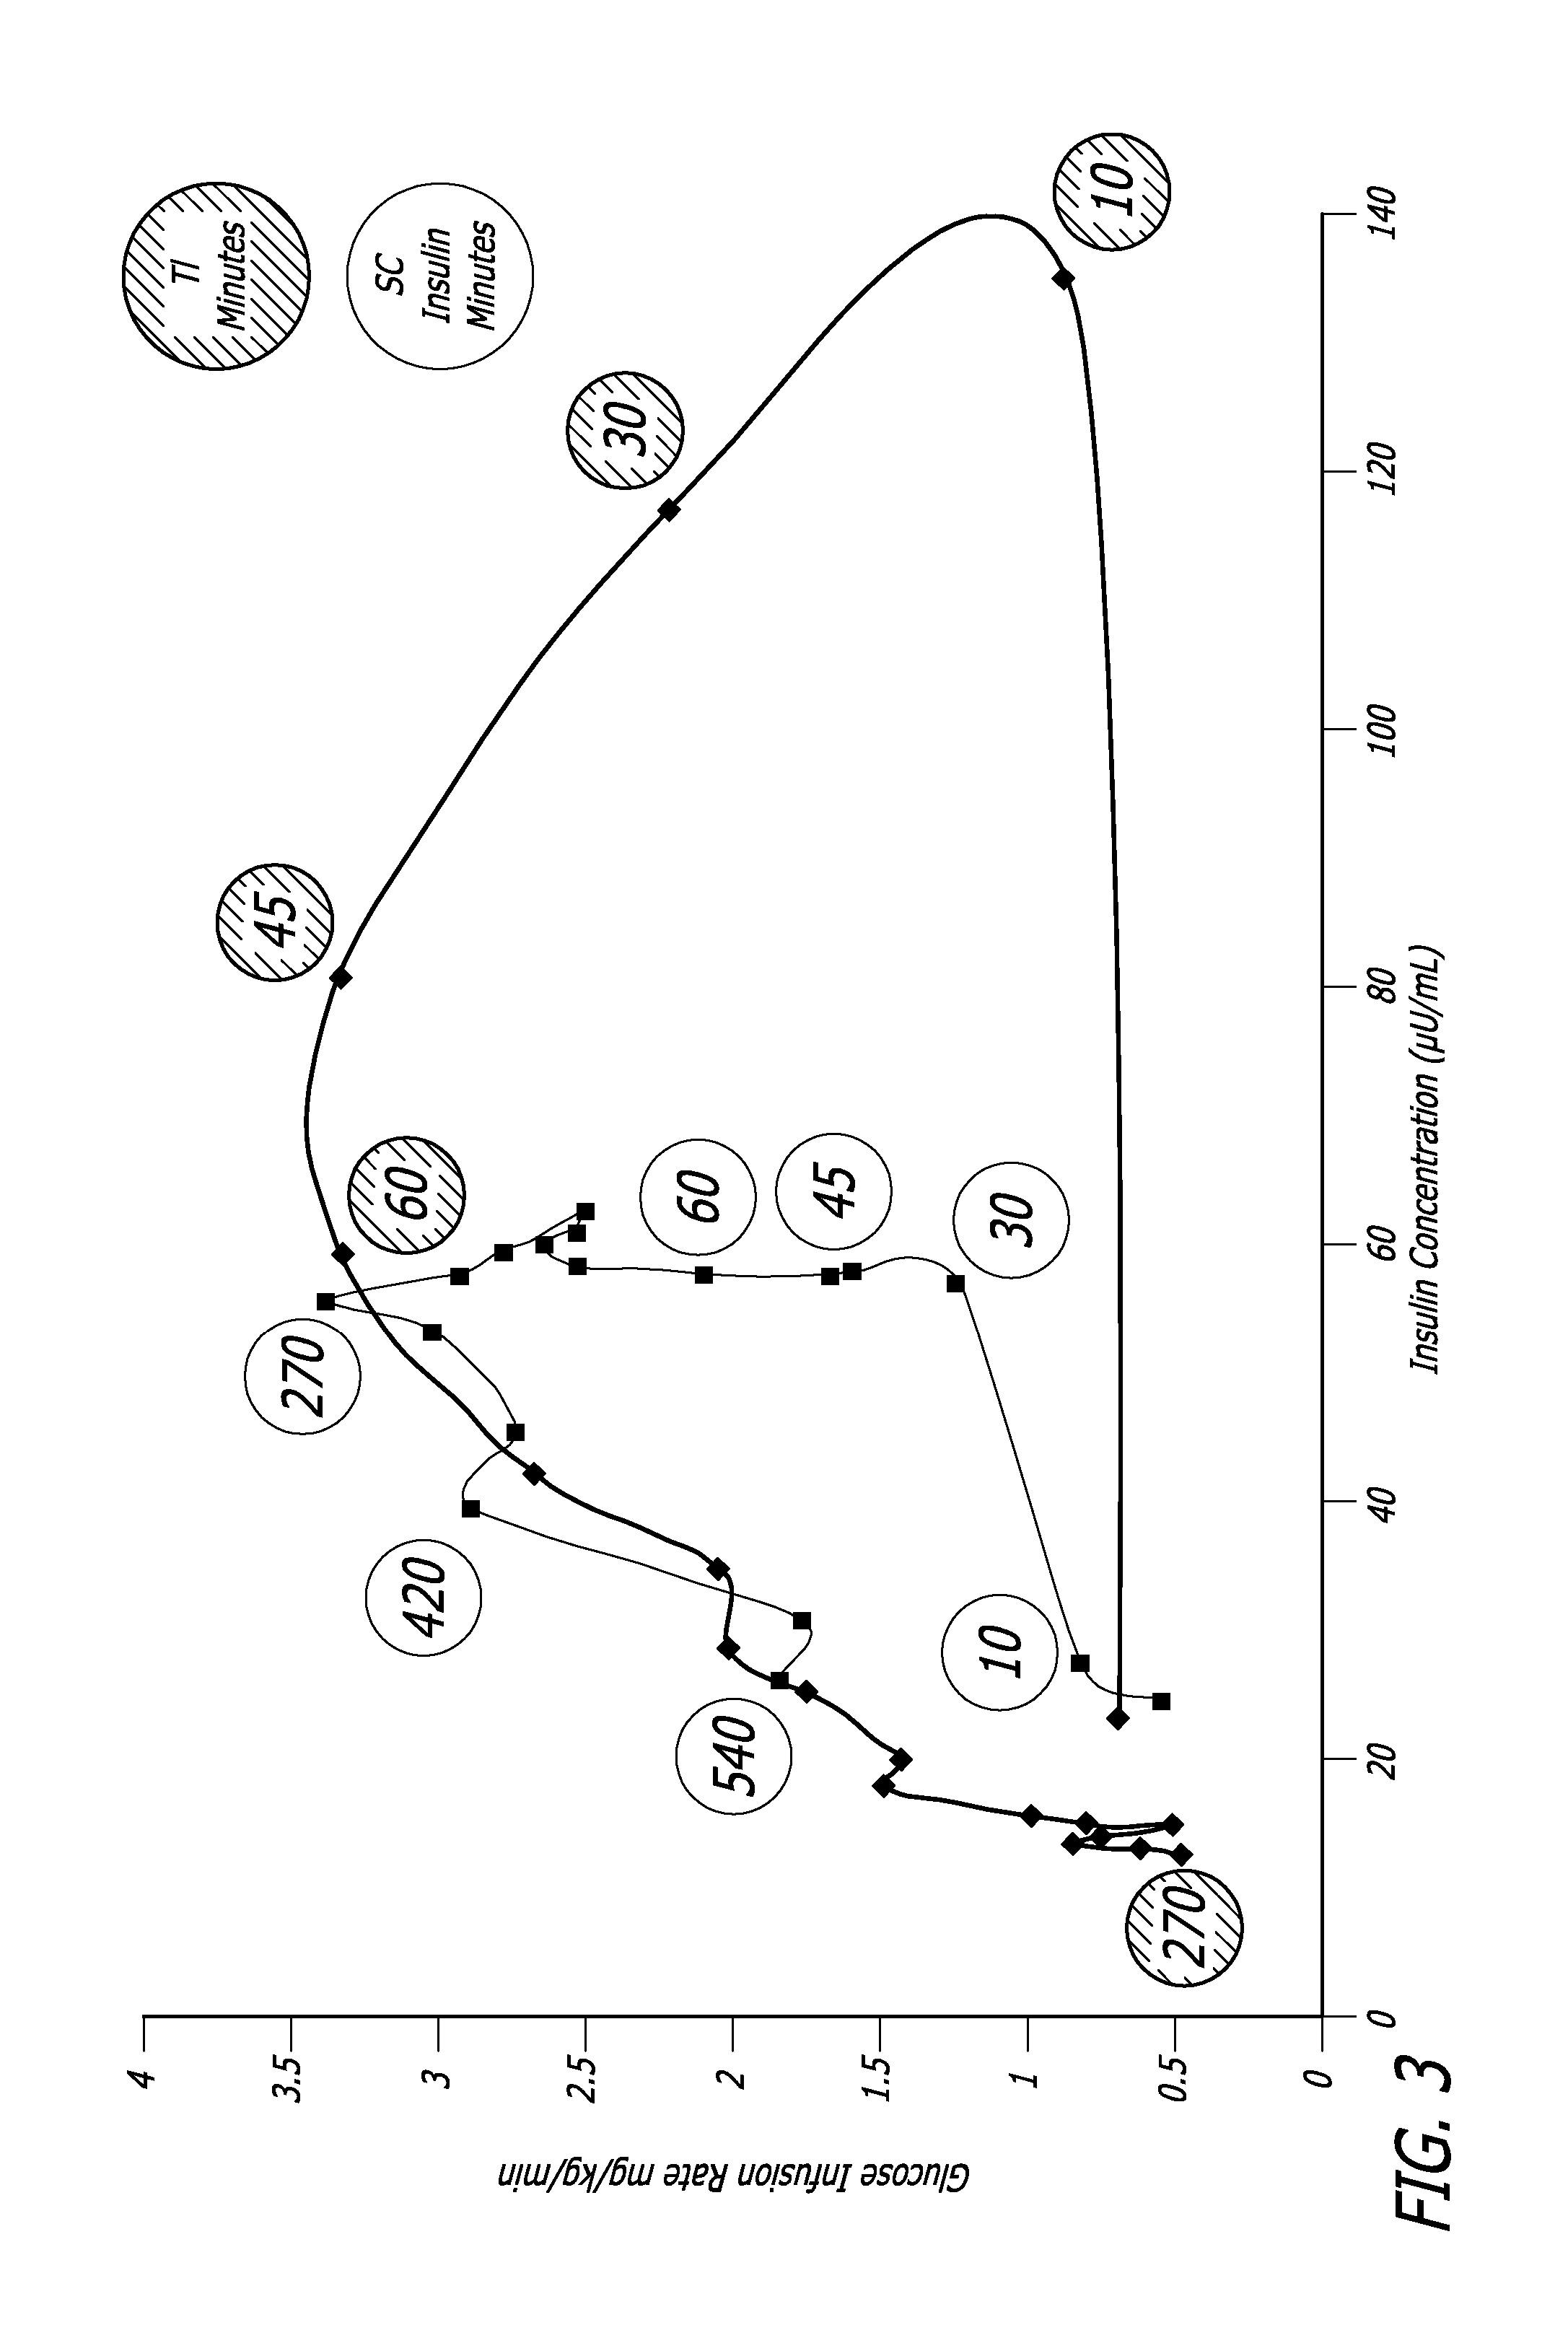 Method of preserving the function of insulin-producing cells